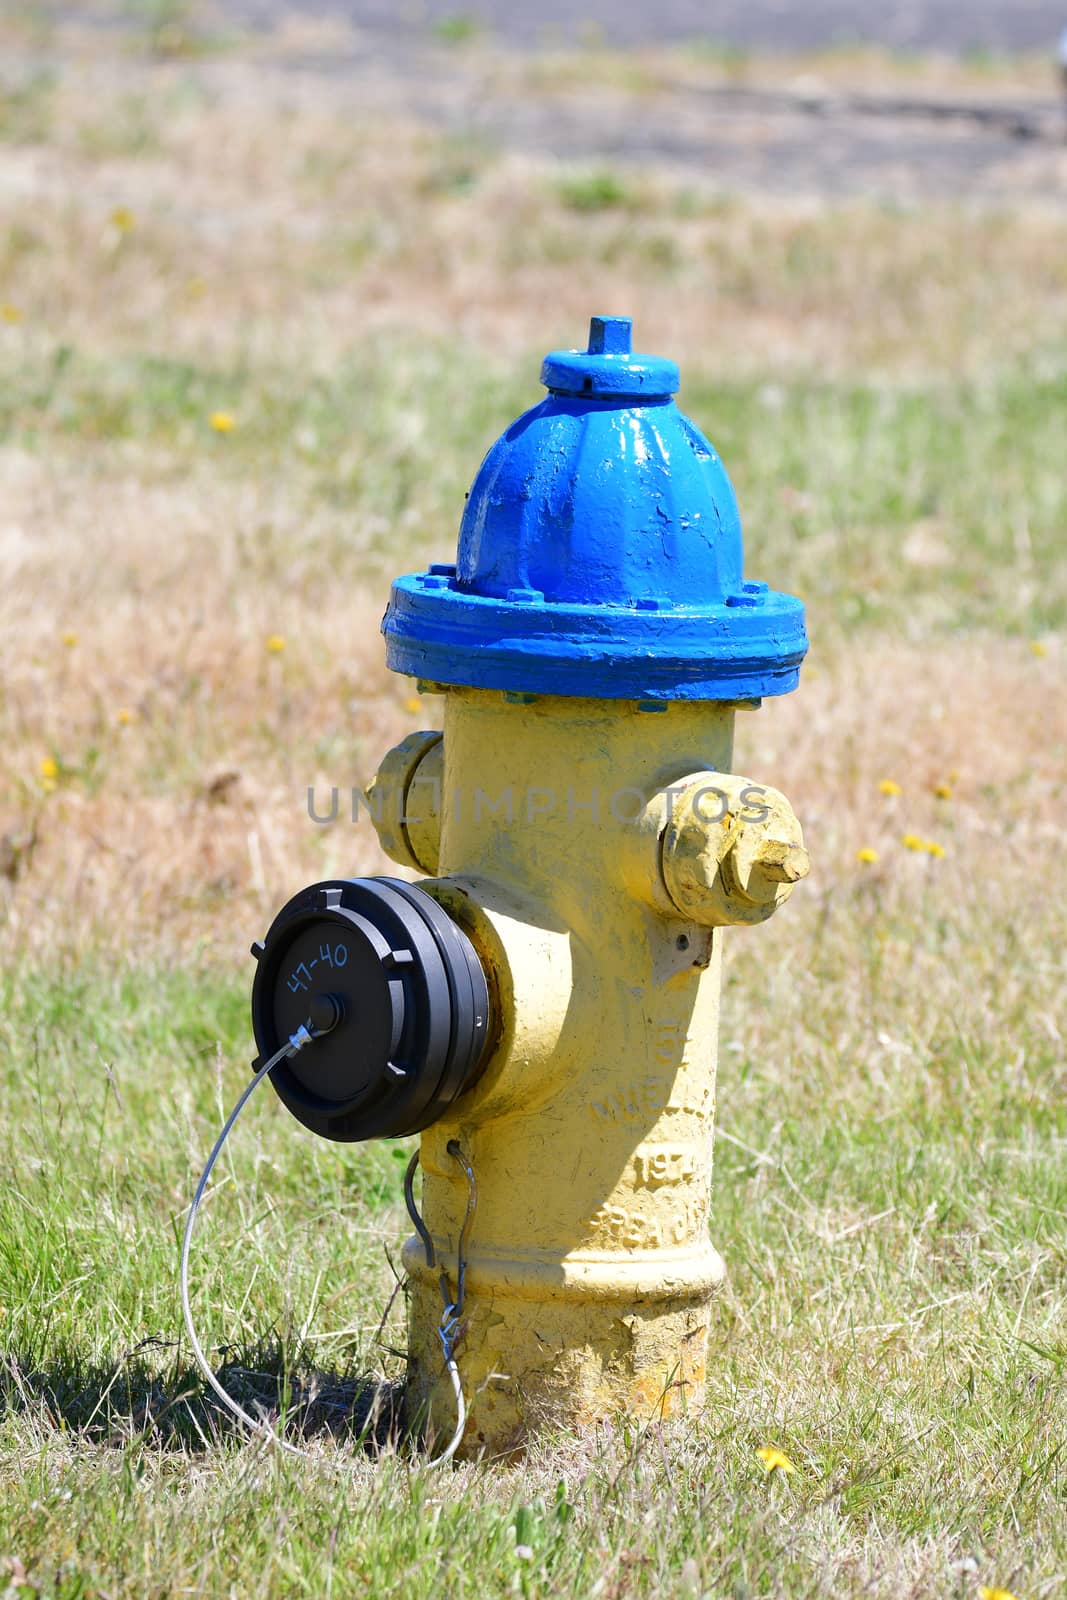 Fire hydrant standing on lawn in sunshine by cestes001